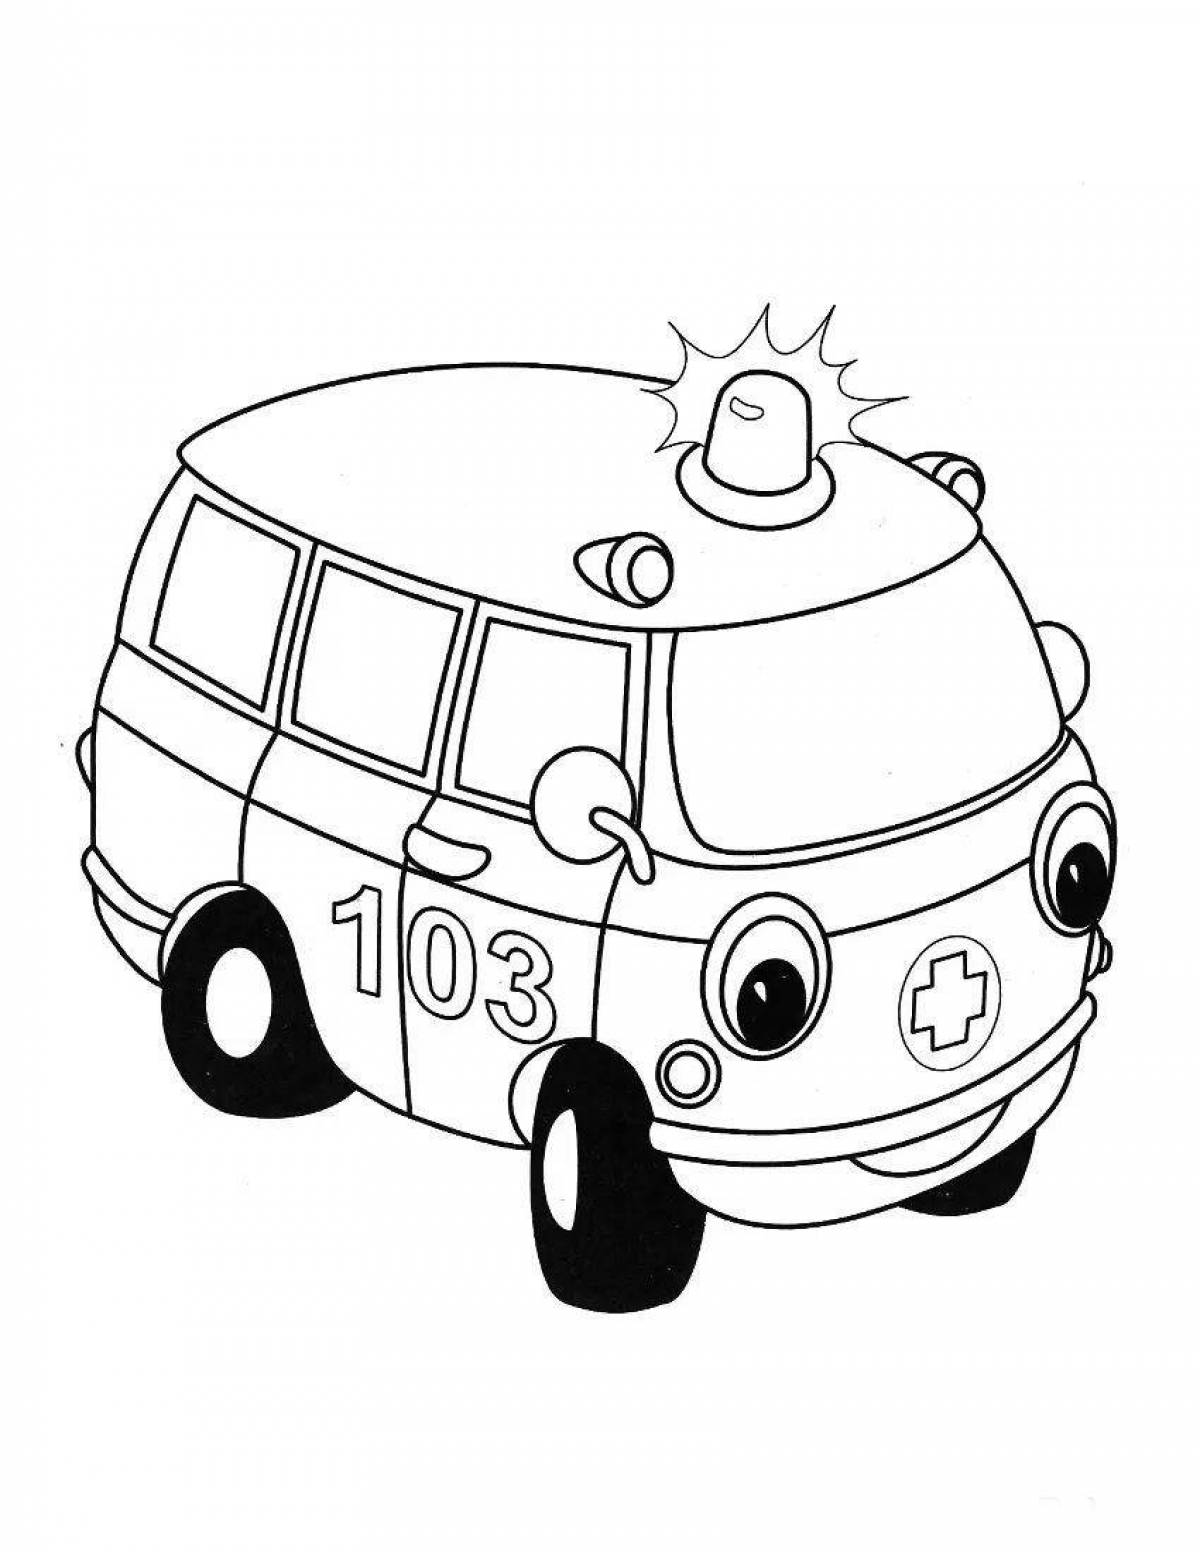 Adorable ambulance coloring book for kids